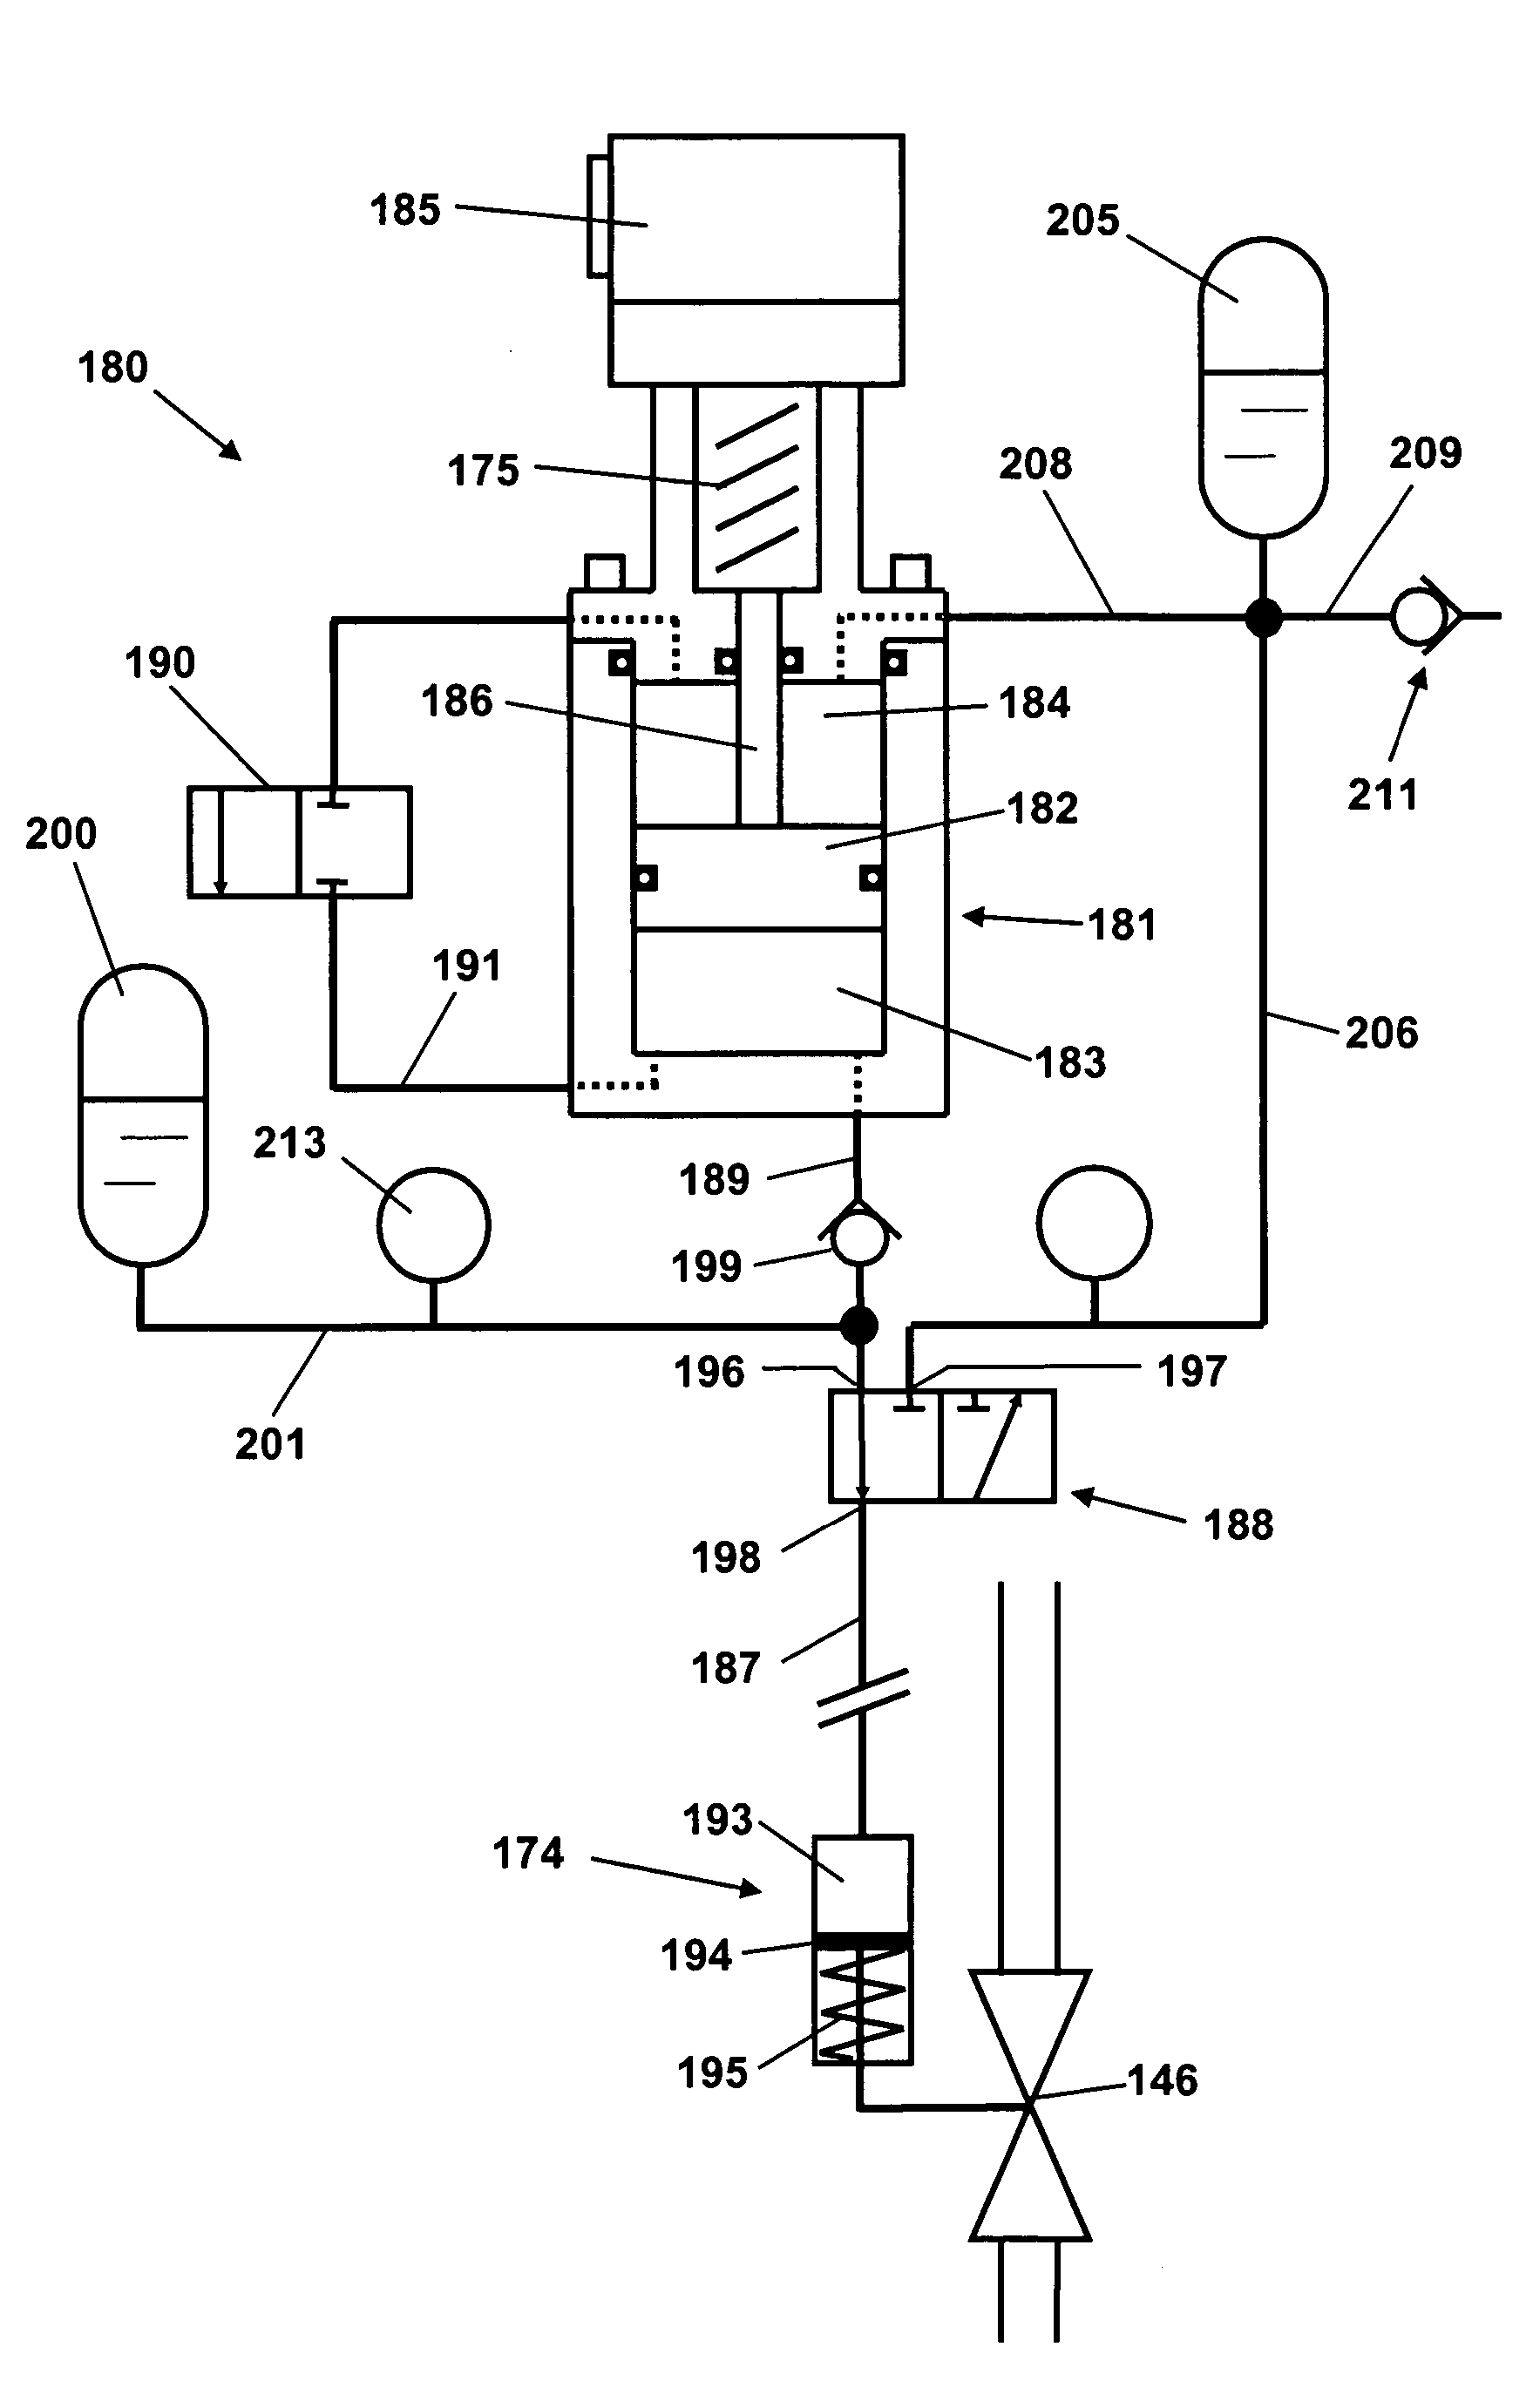 System for controlling a hydraulic actuator, and methods of using same